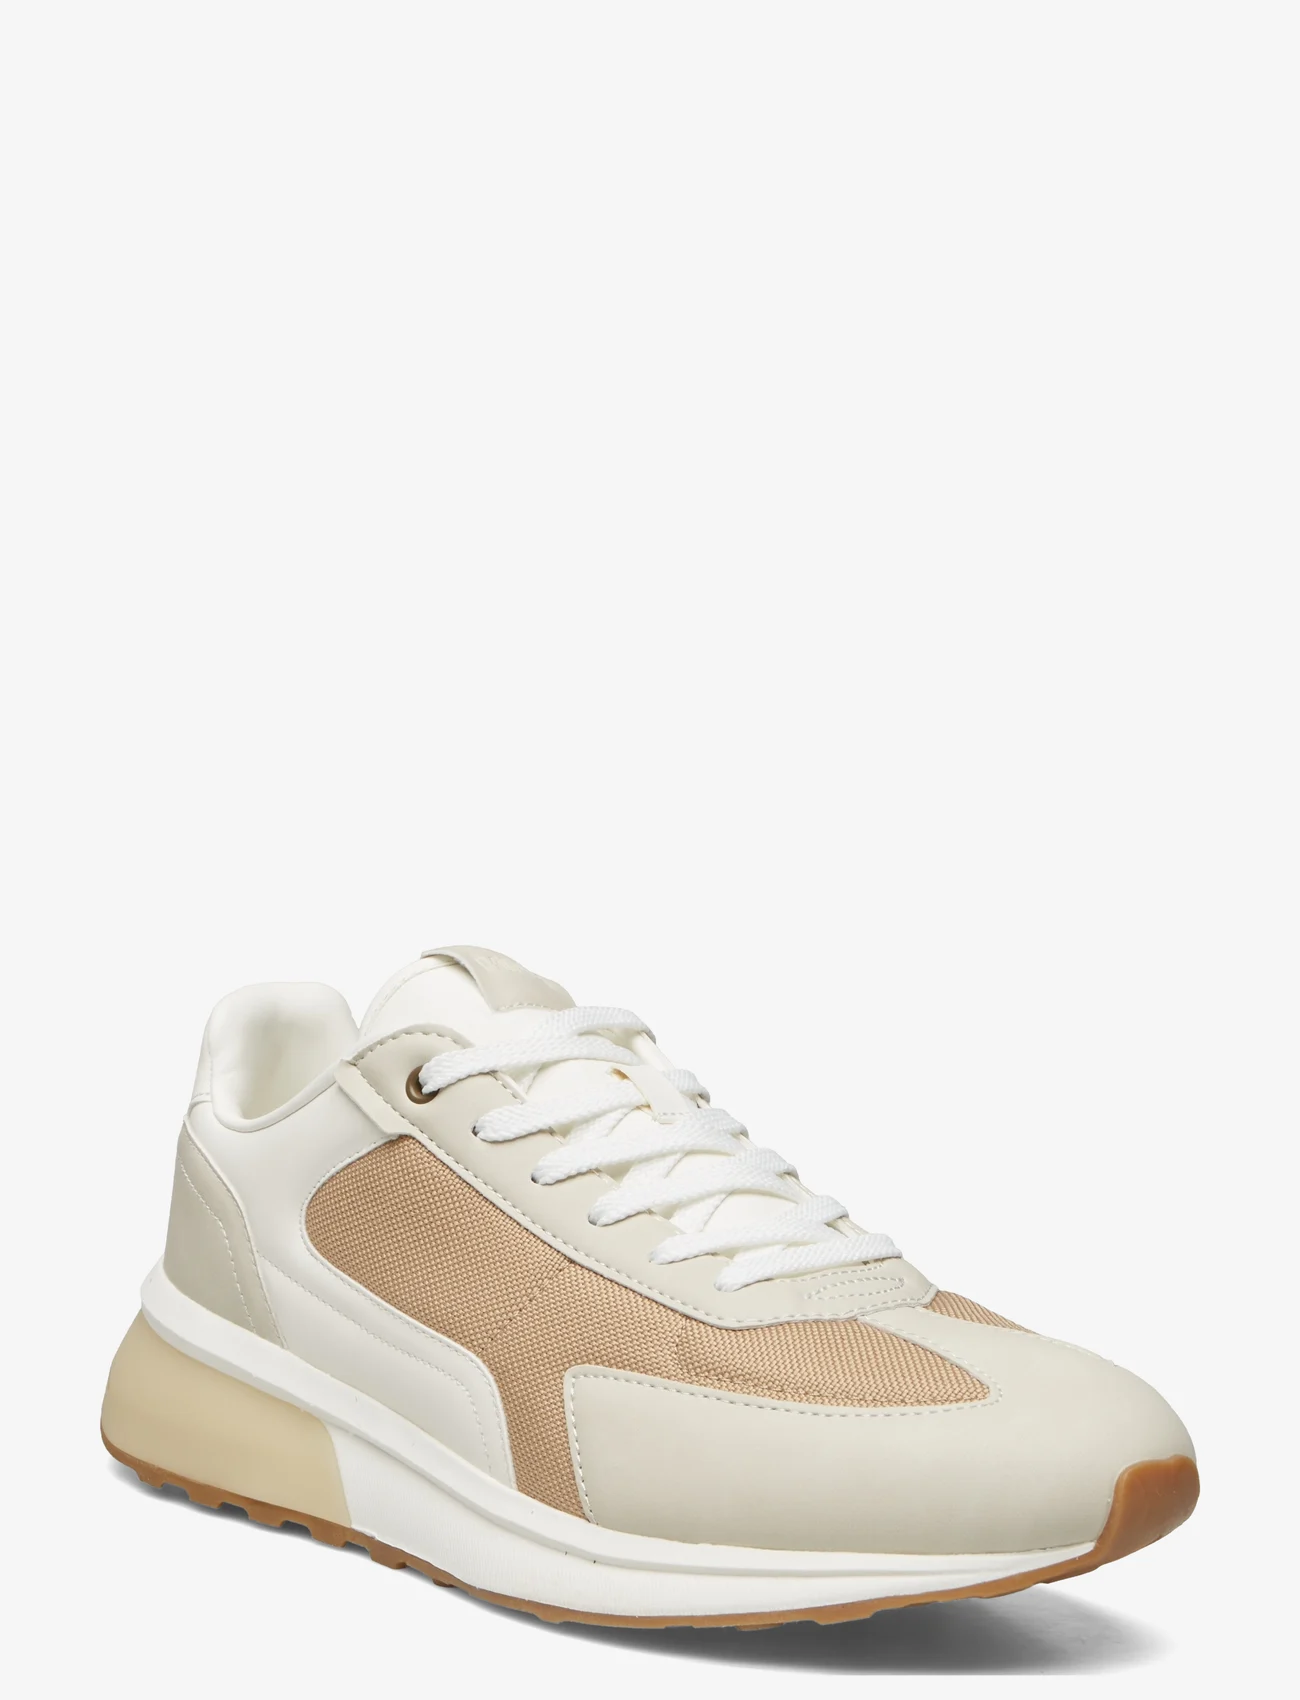 Mango - Leather mixed sneakers - lave sneakers - light beige - 0